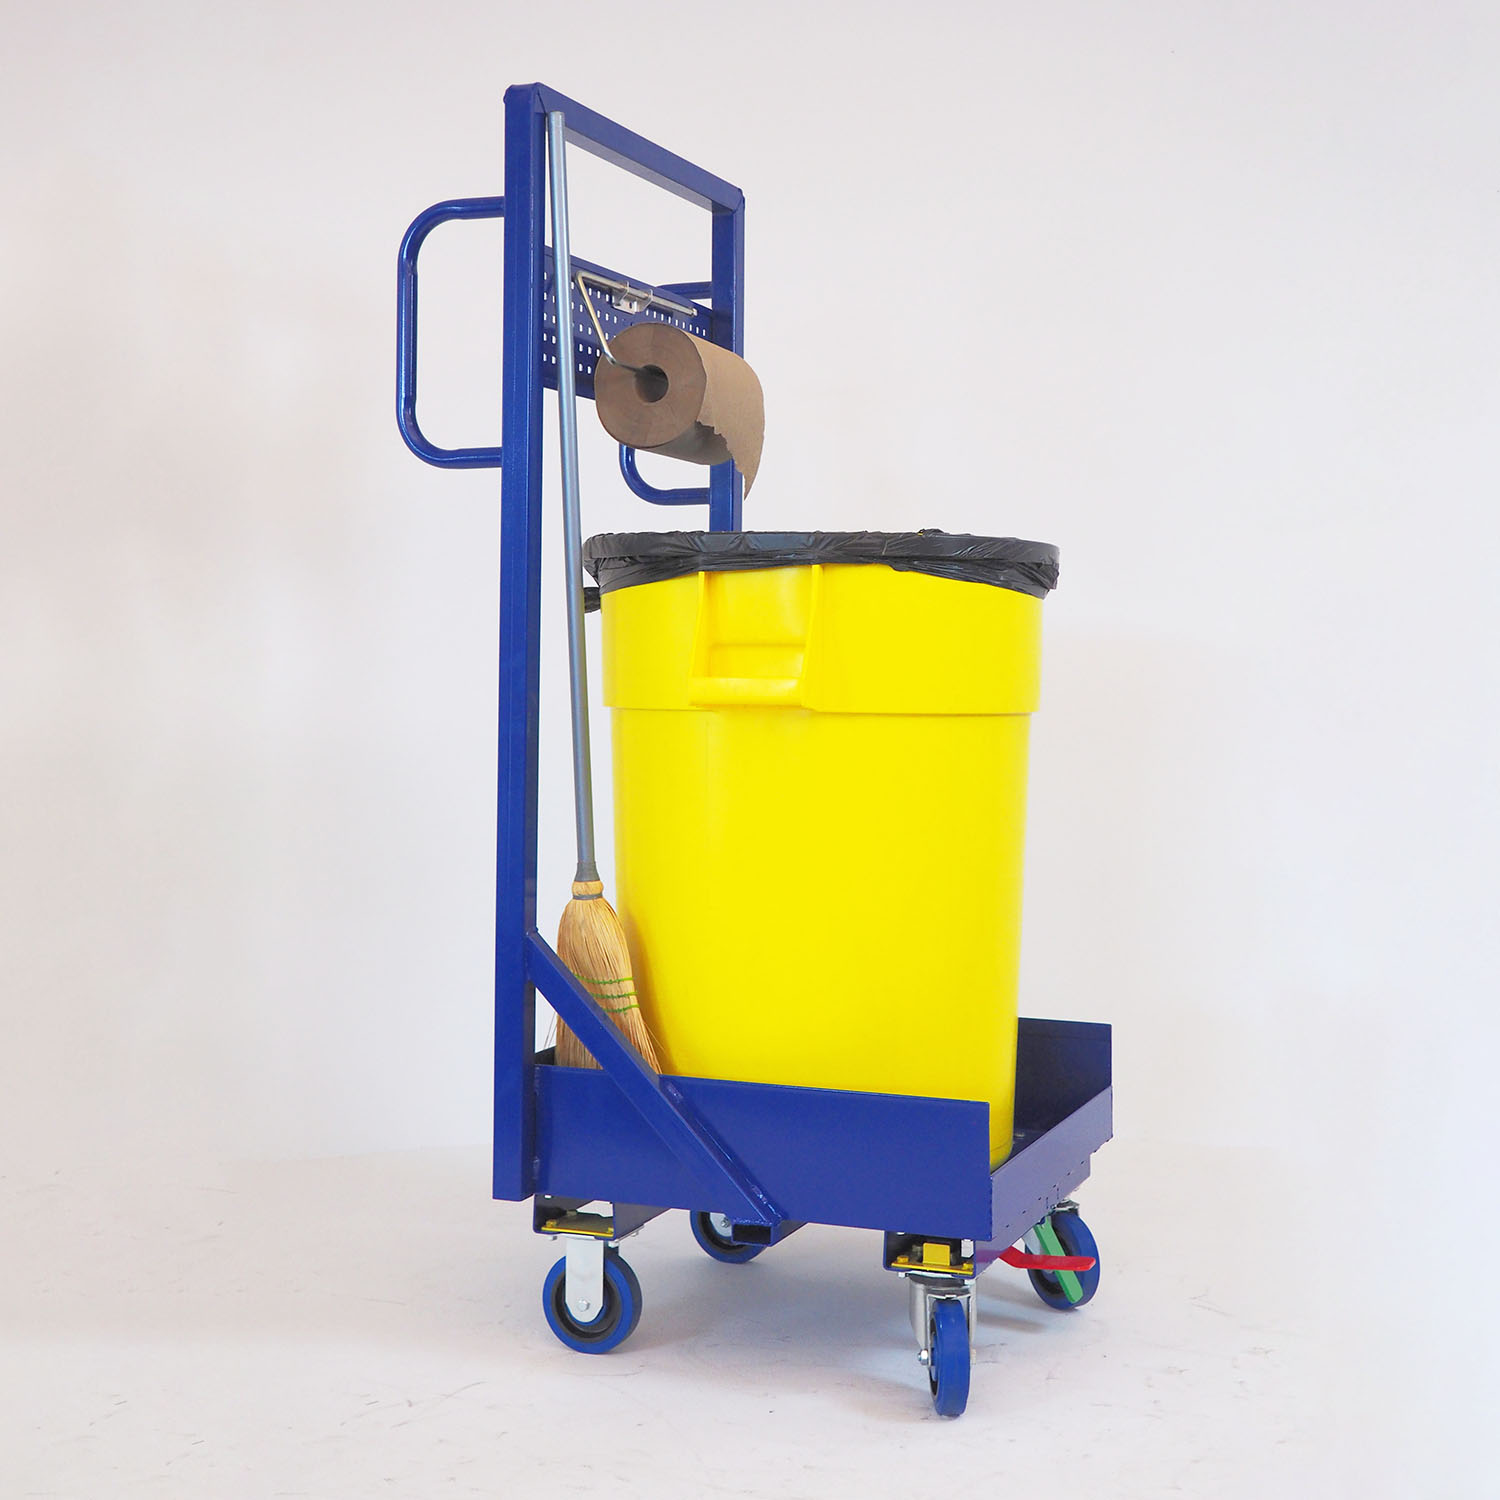 Securely store your cleaning tools with our Trash Carts for quick access. Make cleaning up a breeze with our customizable Trash Carts for increased efficiency. Increase productivity and lower costs with our efficient Trash Cart solutions.